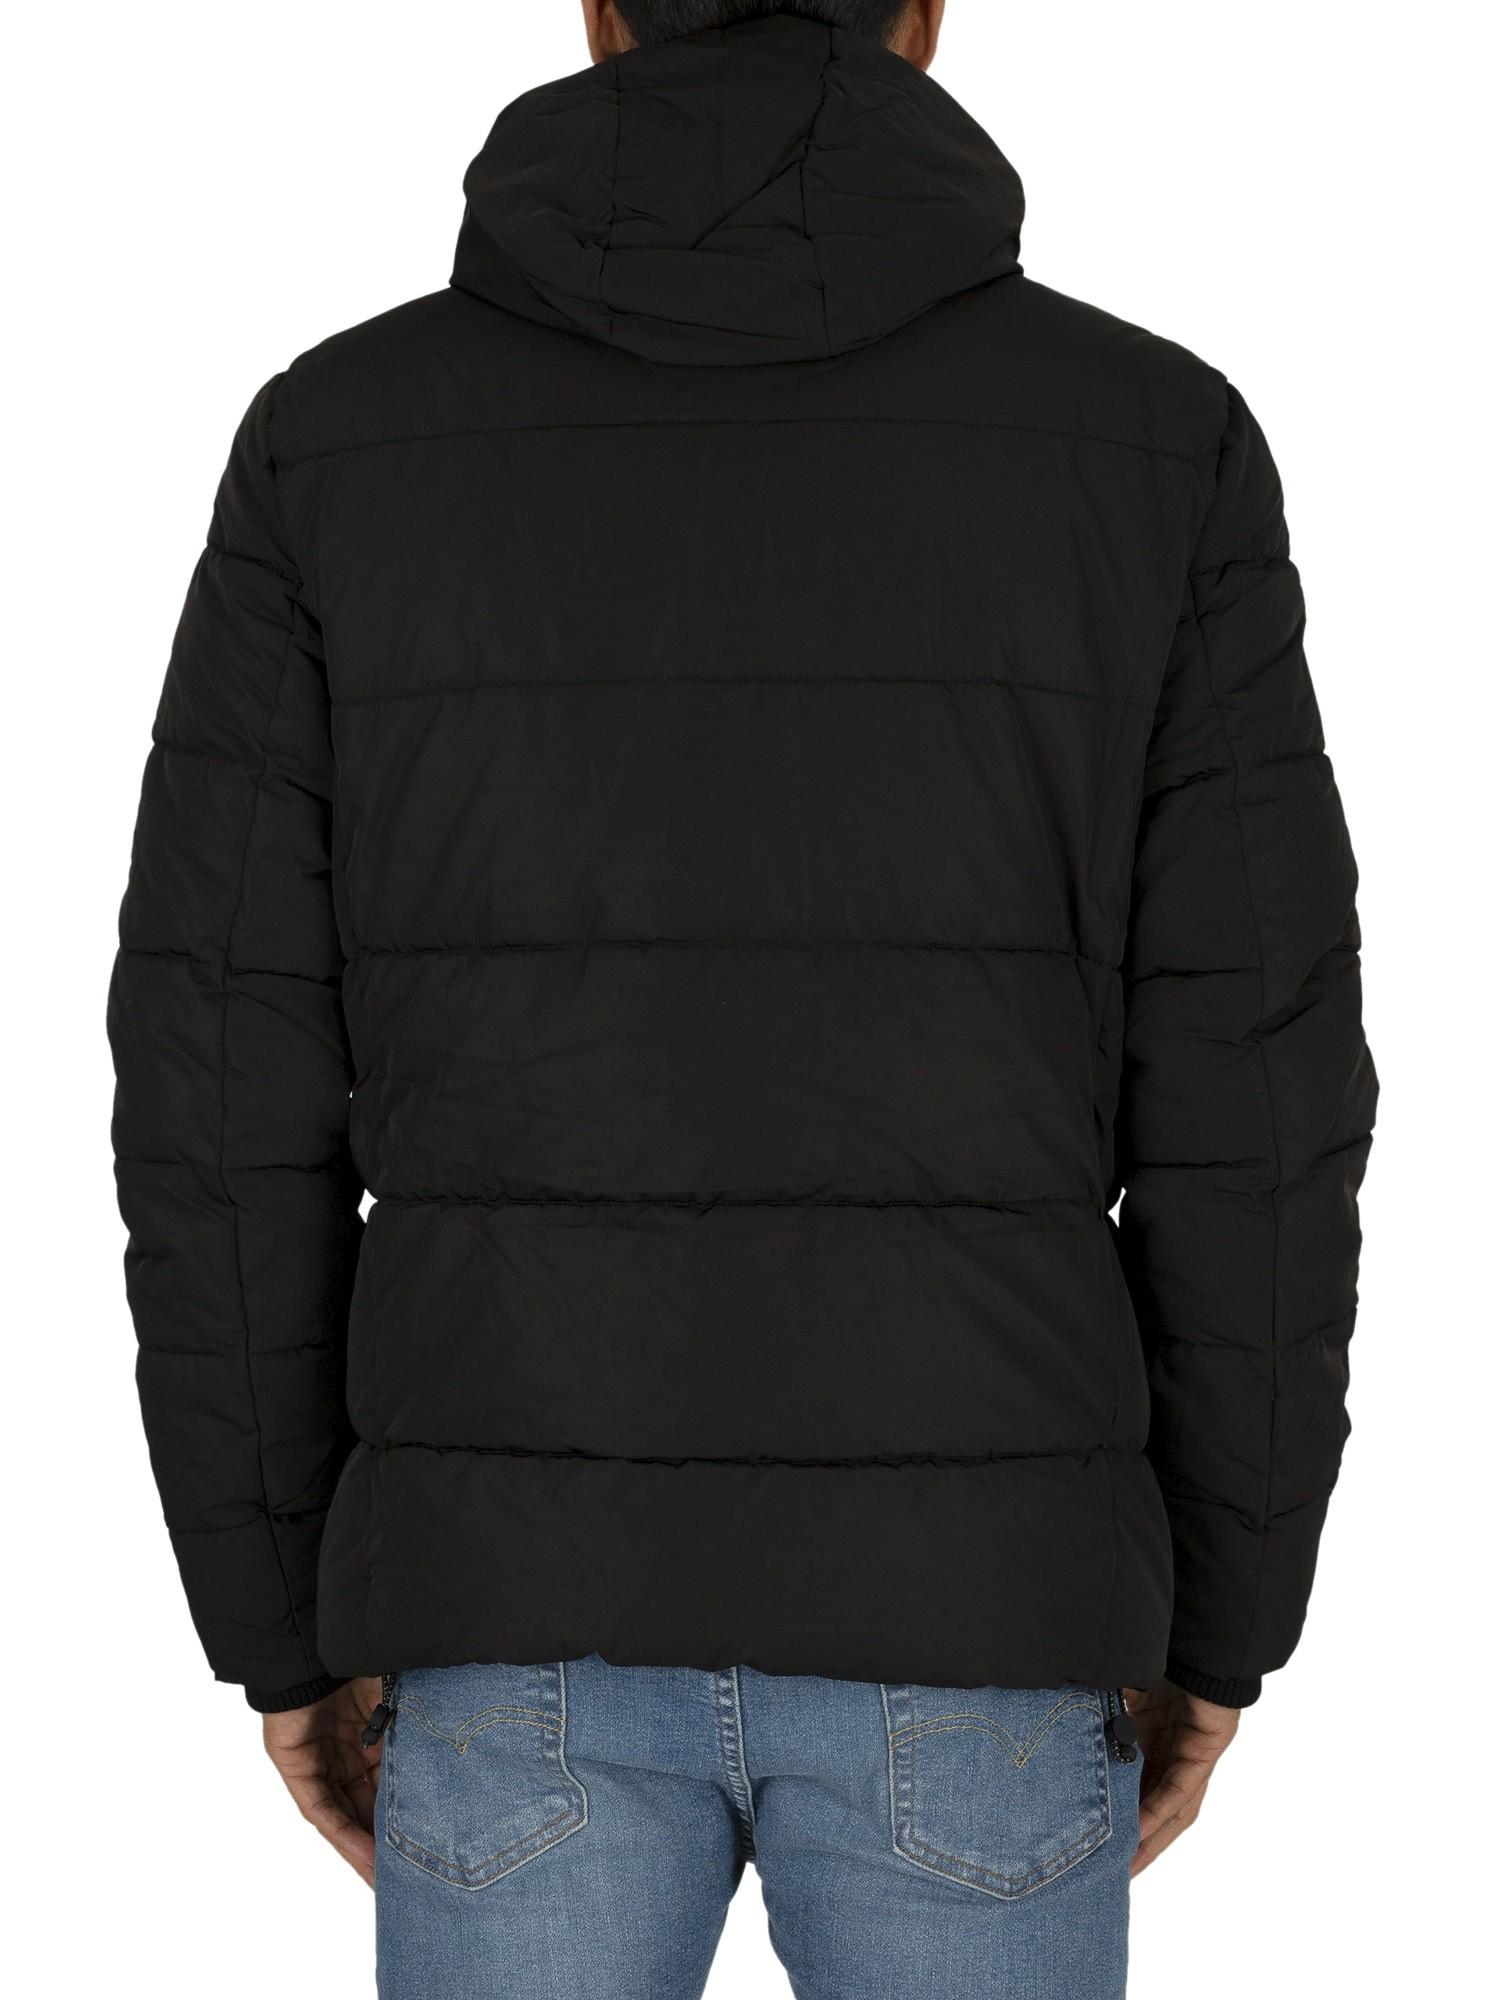 Superdry Synthetic New House Sports Puffer Jacket in Black for Men - Lyst